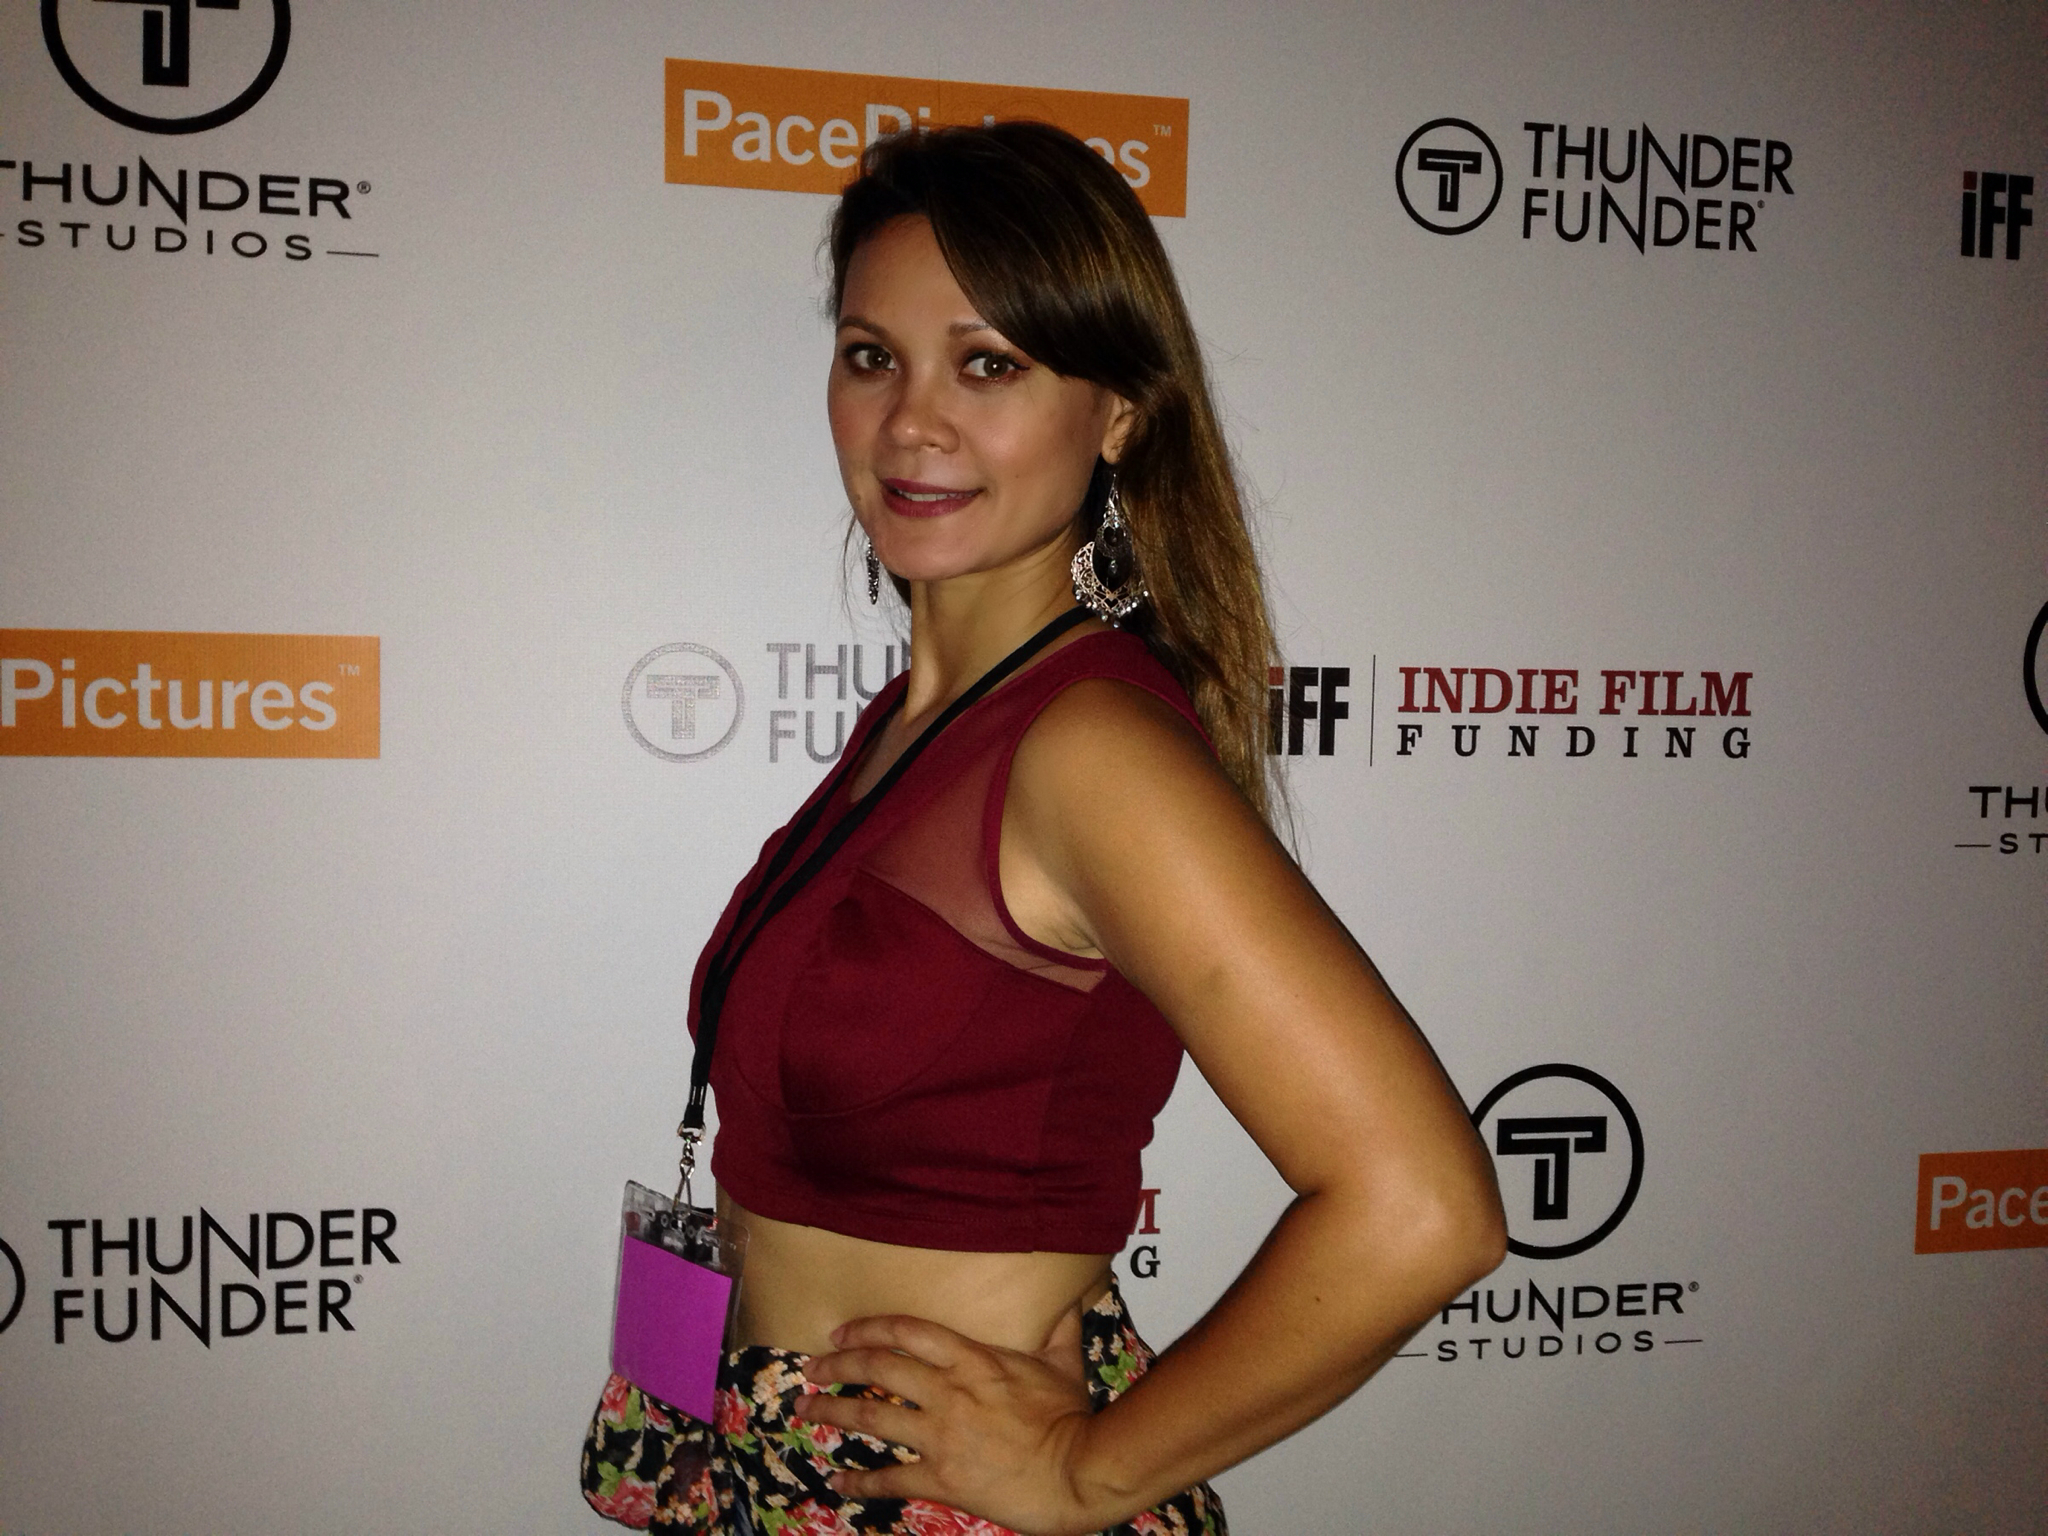 Kimberly Pal attending Filmmaker Welcome party at Thunder Studios, kicking off to 2014 Cambodian Town Film Festival.